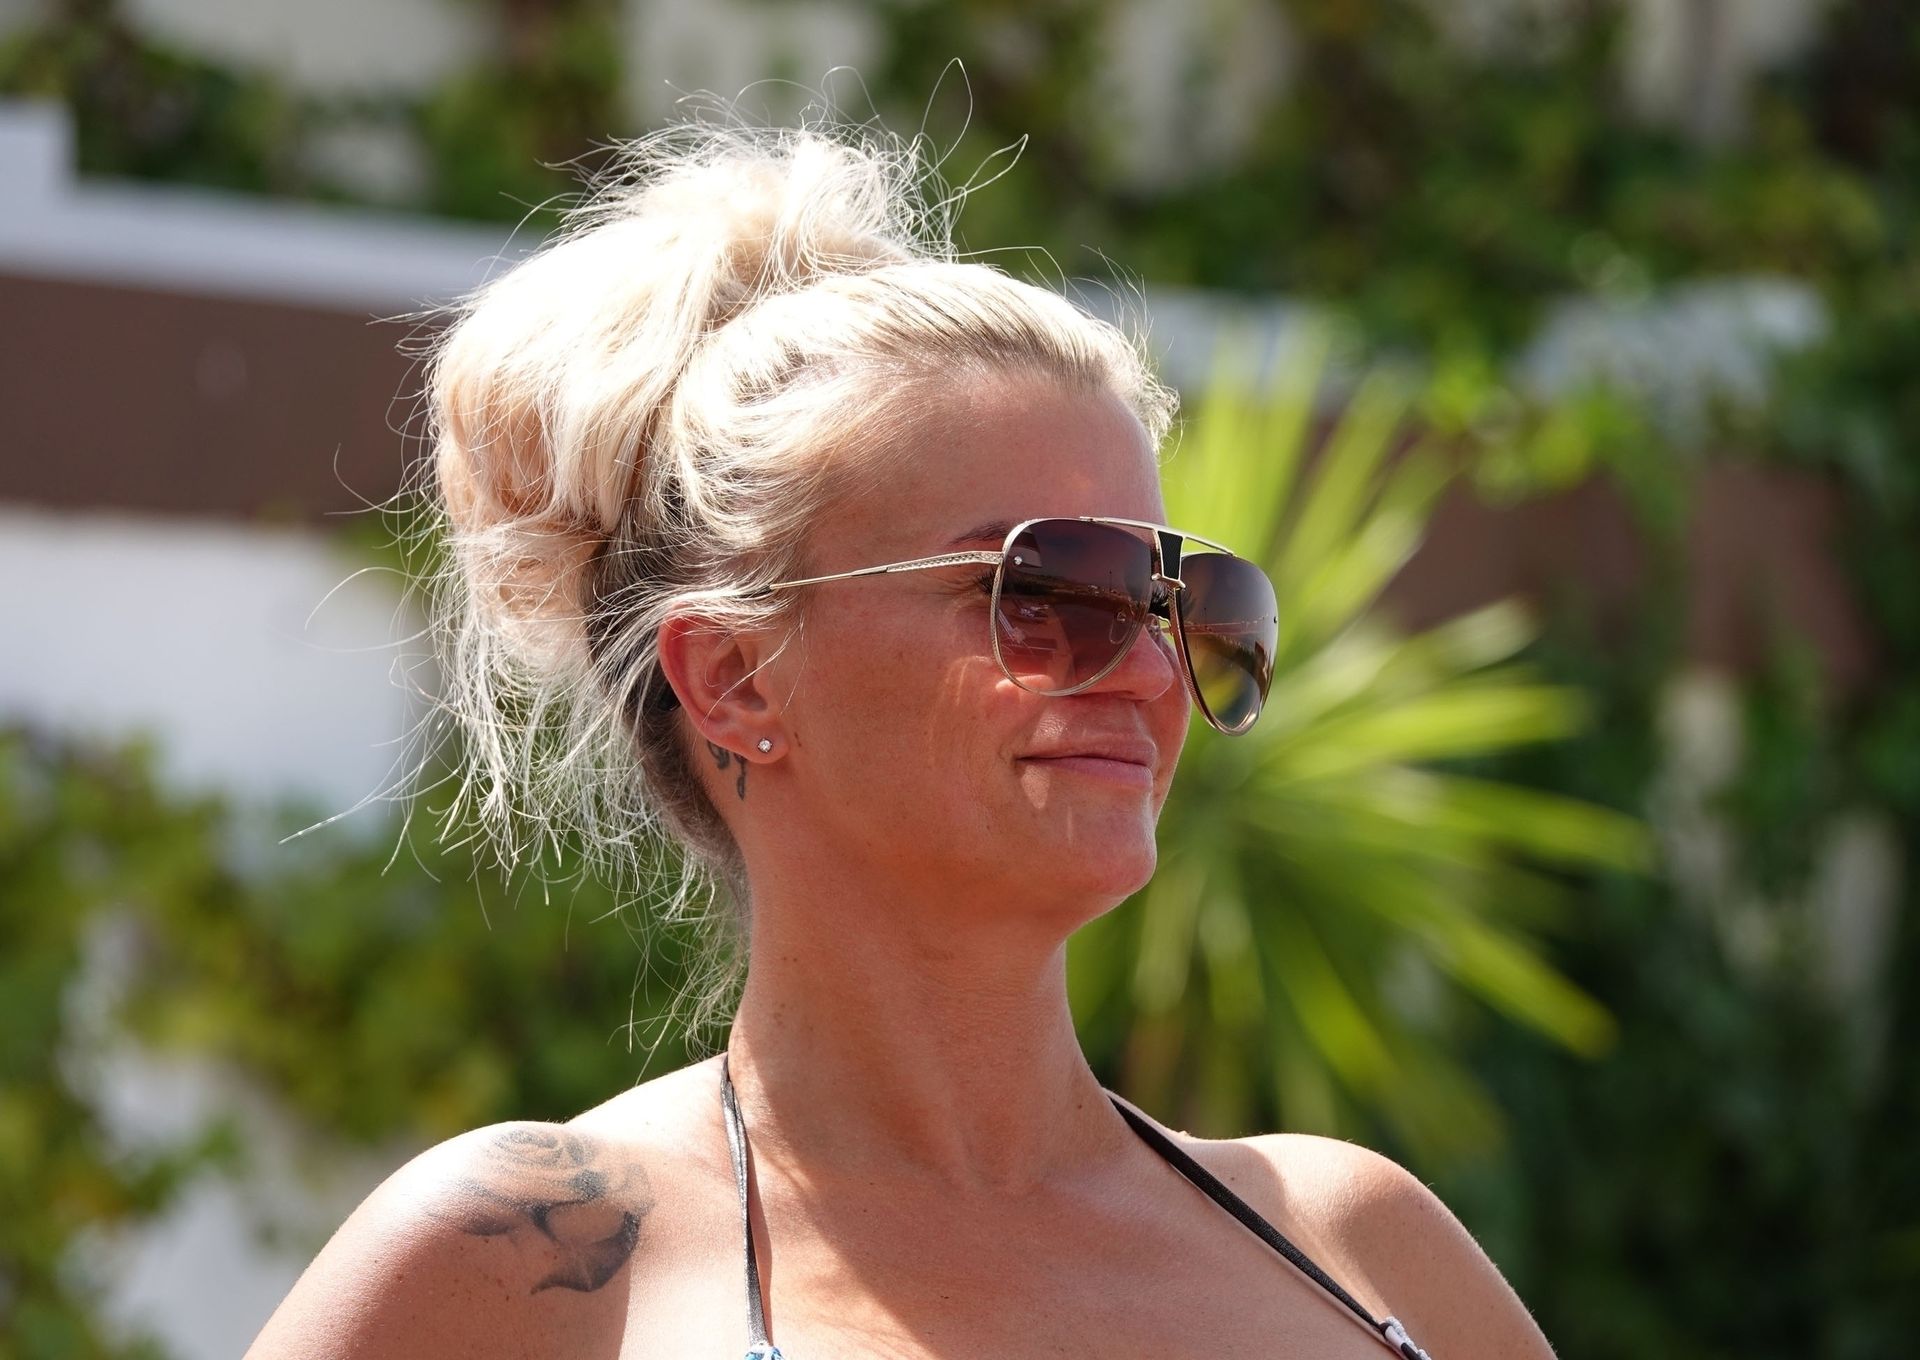 Kerry Katona Shows Off Her Two Stone Weight Loss and Looks Incredible (55 Photos)